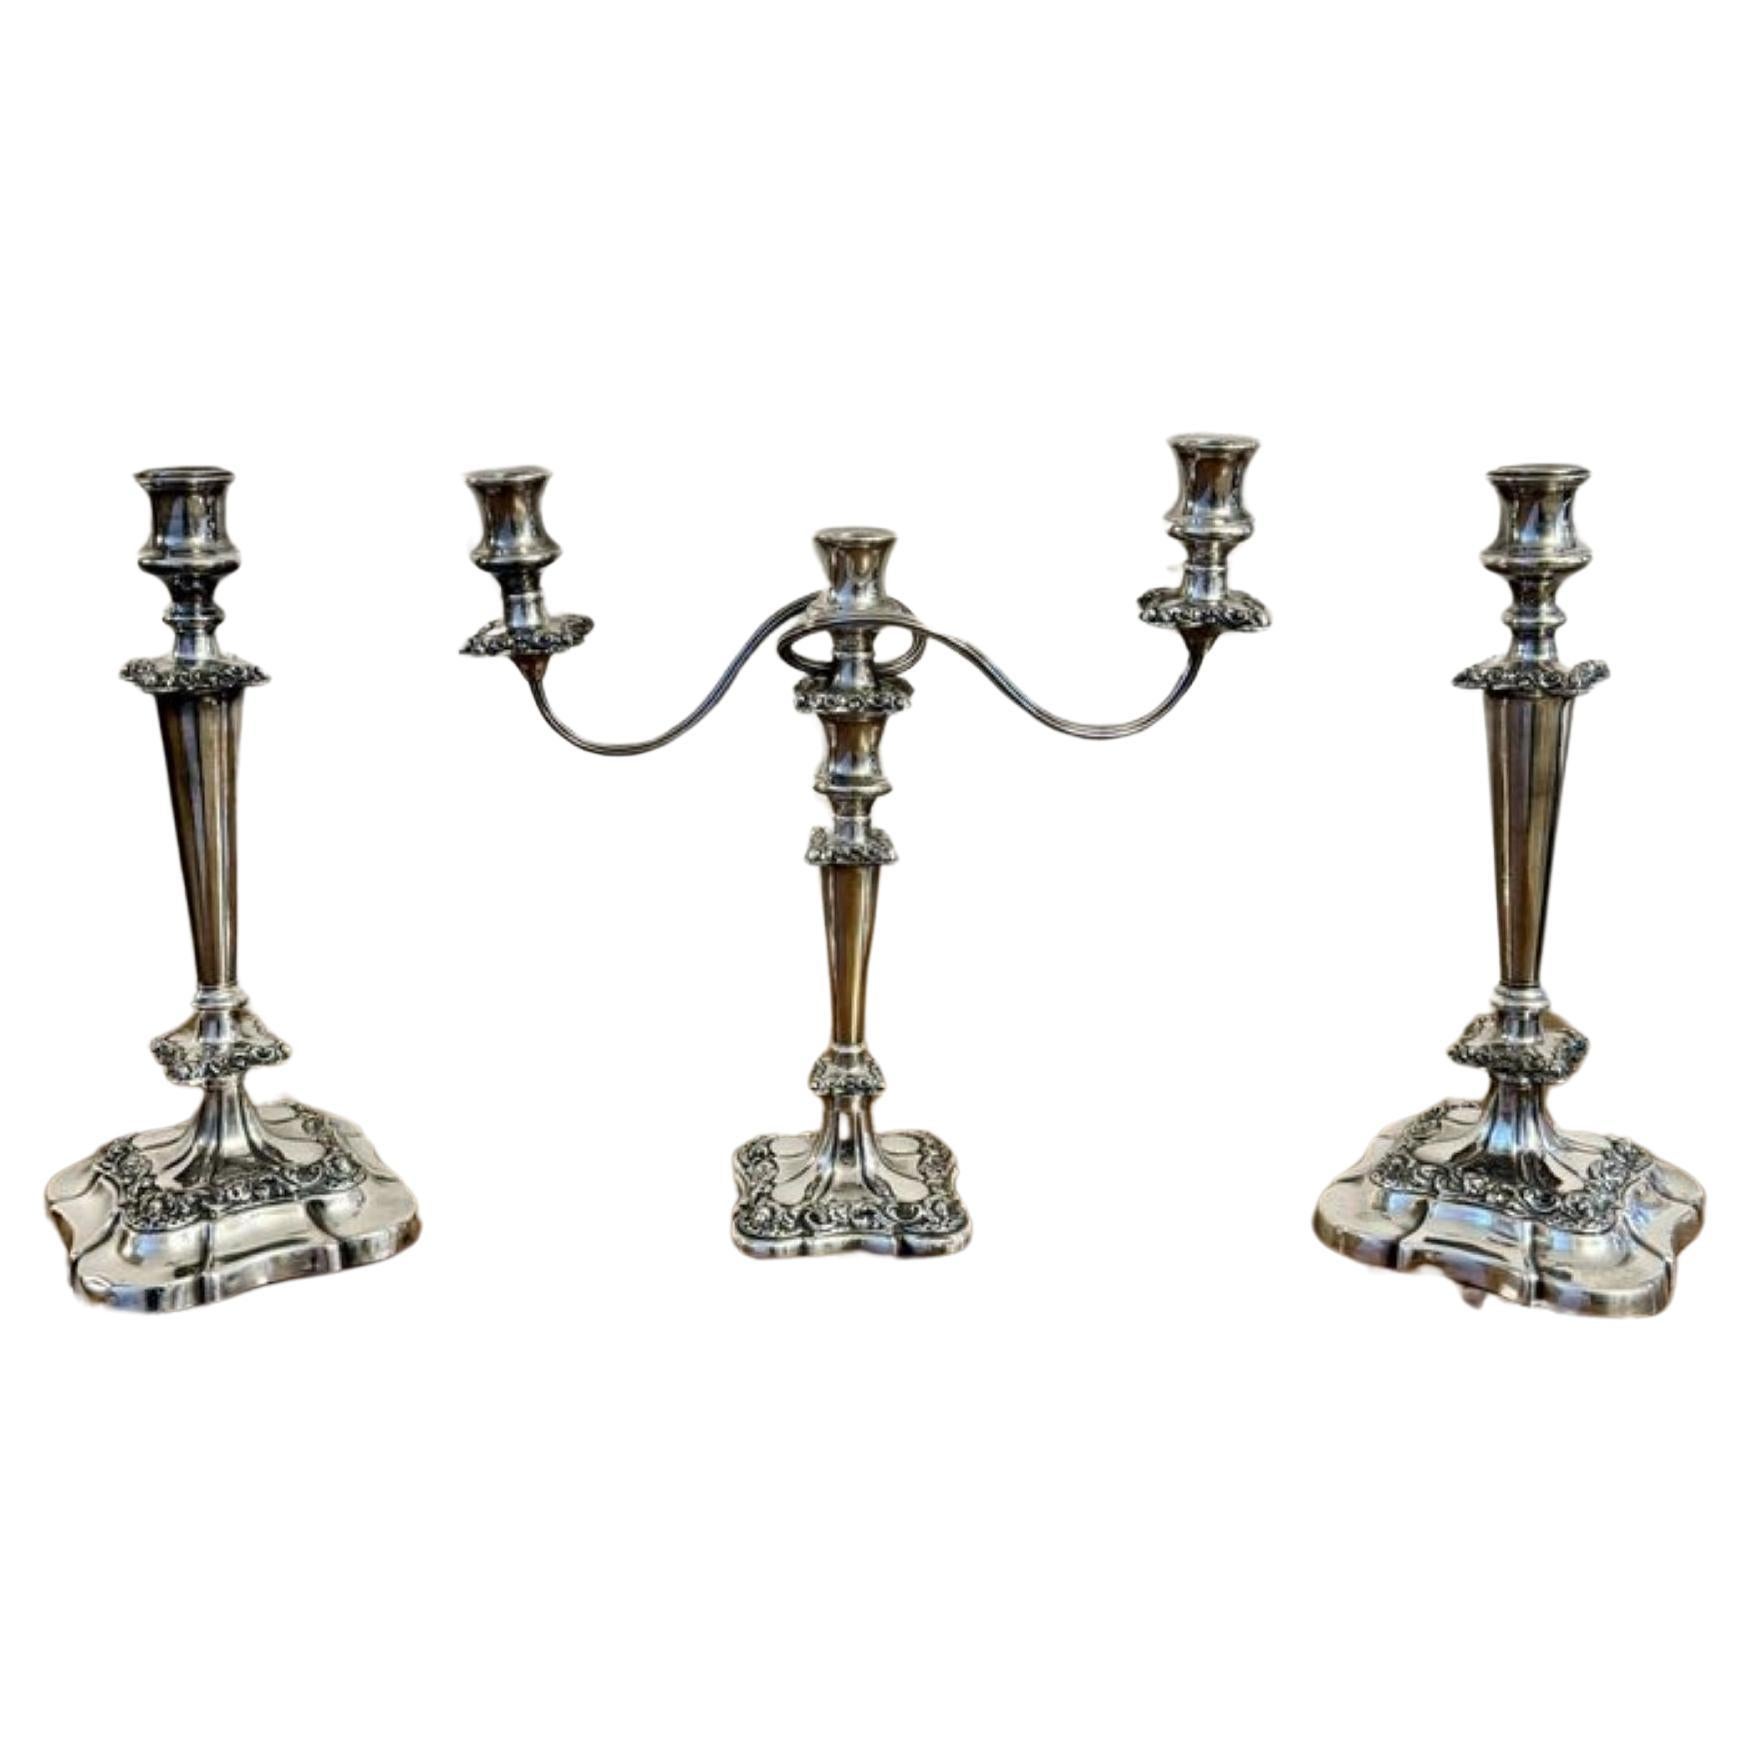 Outstanding quality antique Victorian ornate silver plated candelabra and candle